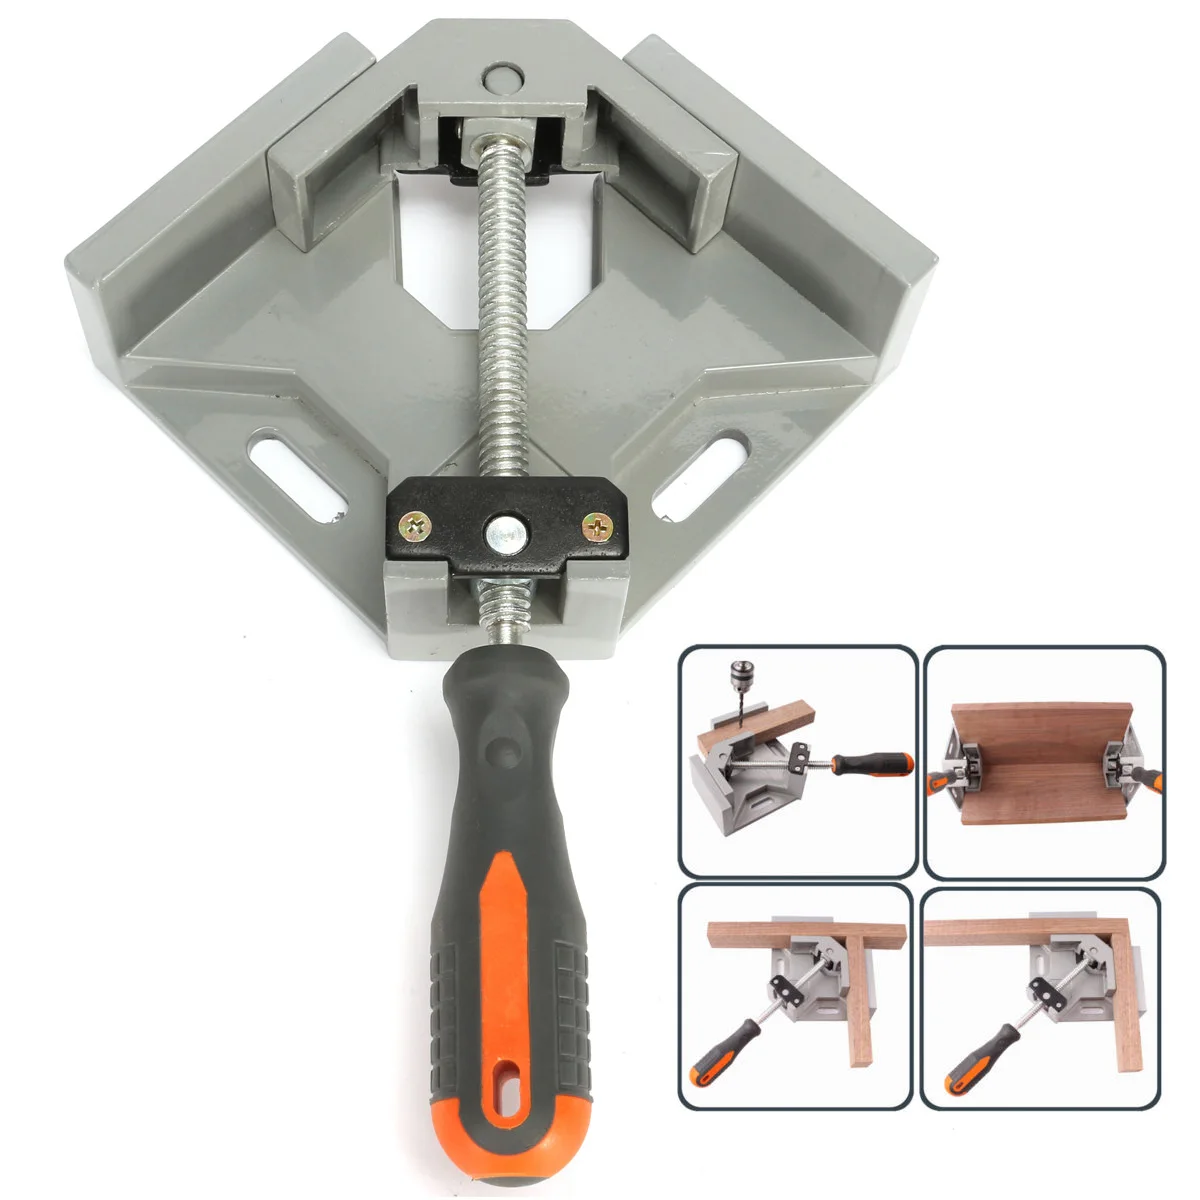 

90 Degree Corner Clamp Woodworking Right Angle Clip Plastic Single Hanle Double Handle Clamps for Framing Photo Clamping Tools